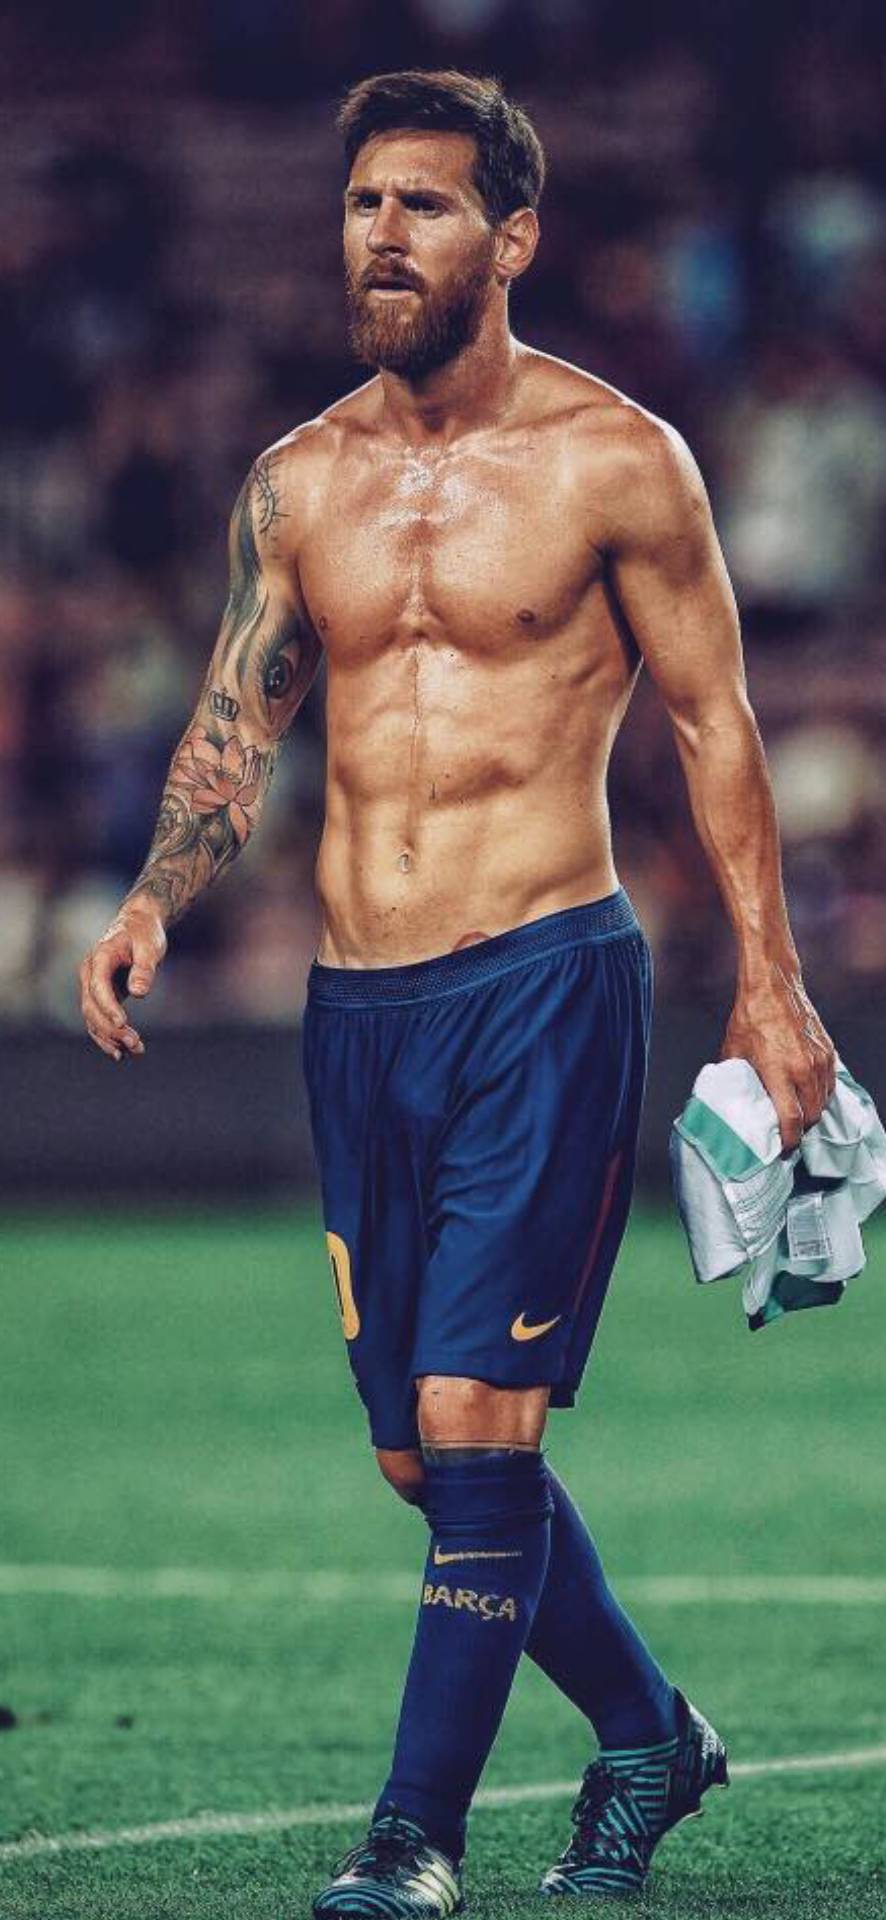 Lionel Messi Wallpaper Download - Lionel Messi Without Shirt - 886x1920  Wallpaper 